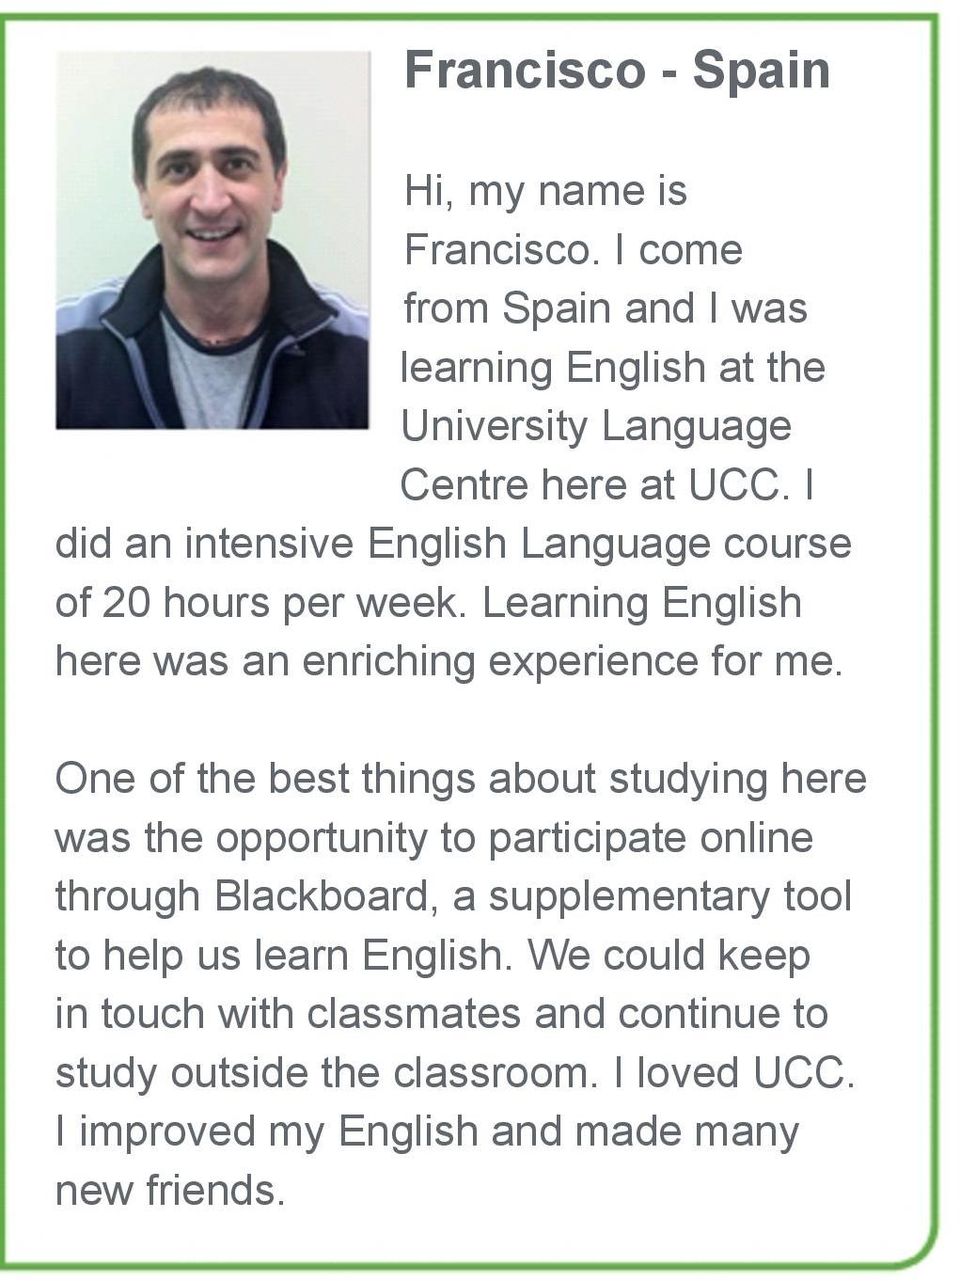 One of the best things about studying here was the opportunity to participate online through Blackboard, a supplementary tool to help us